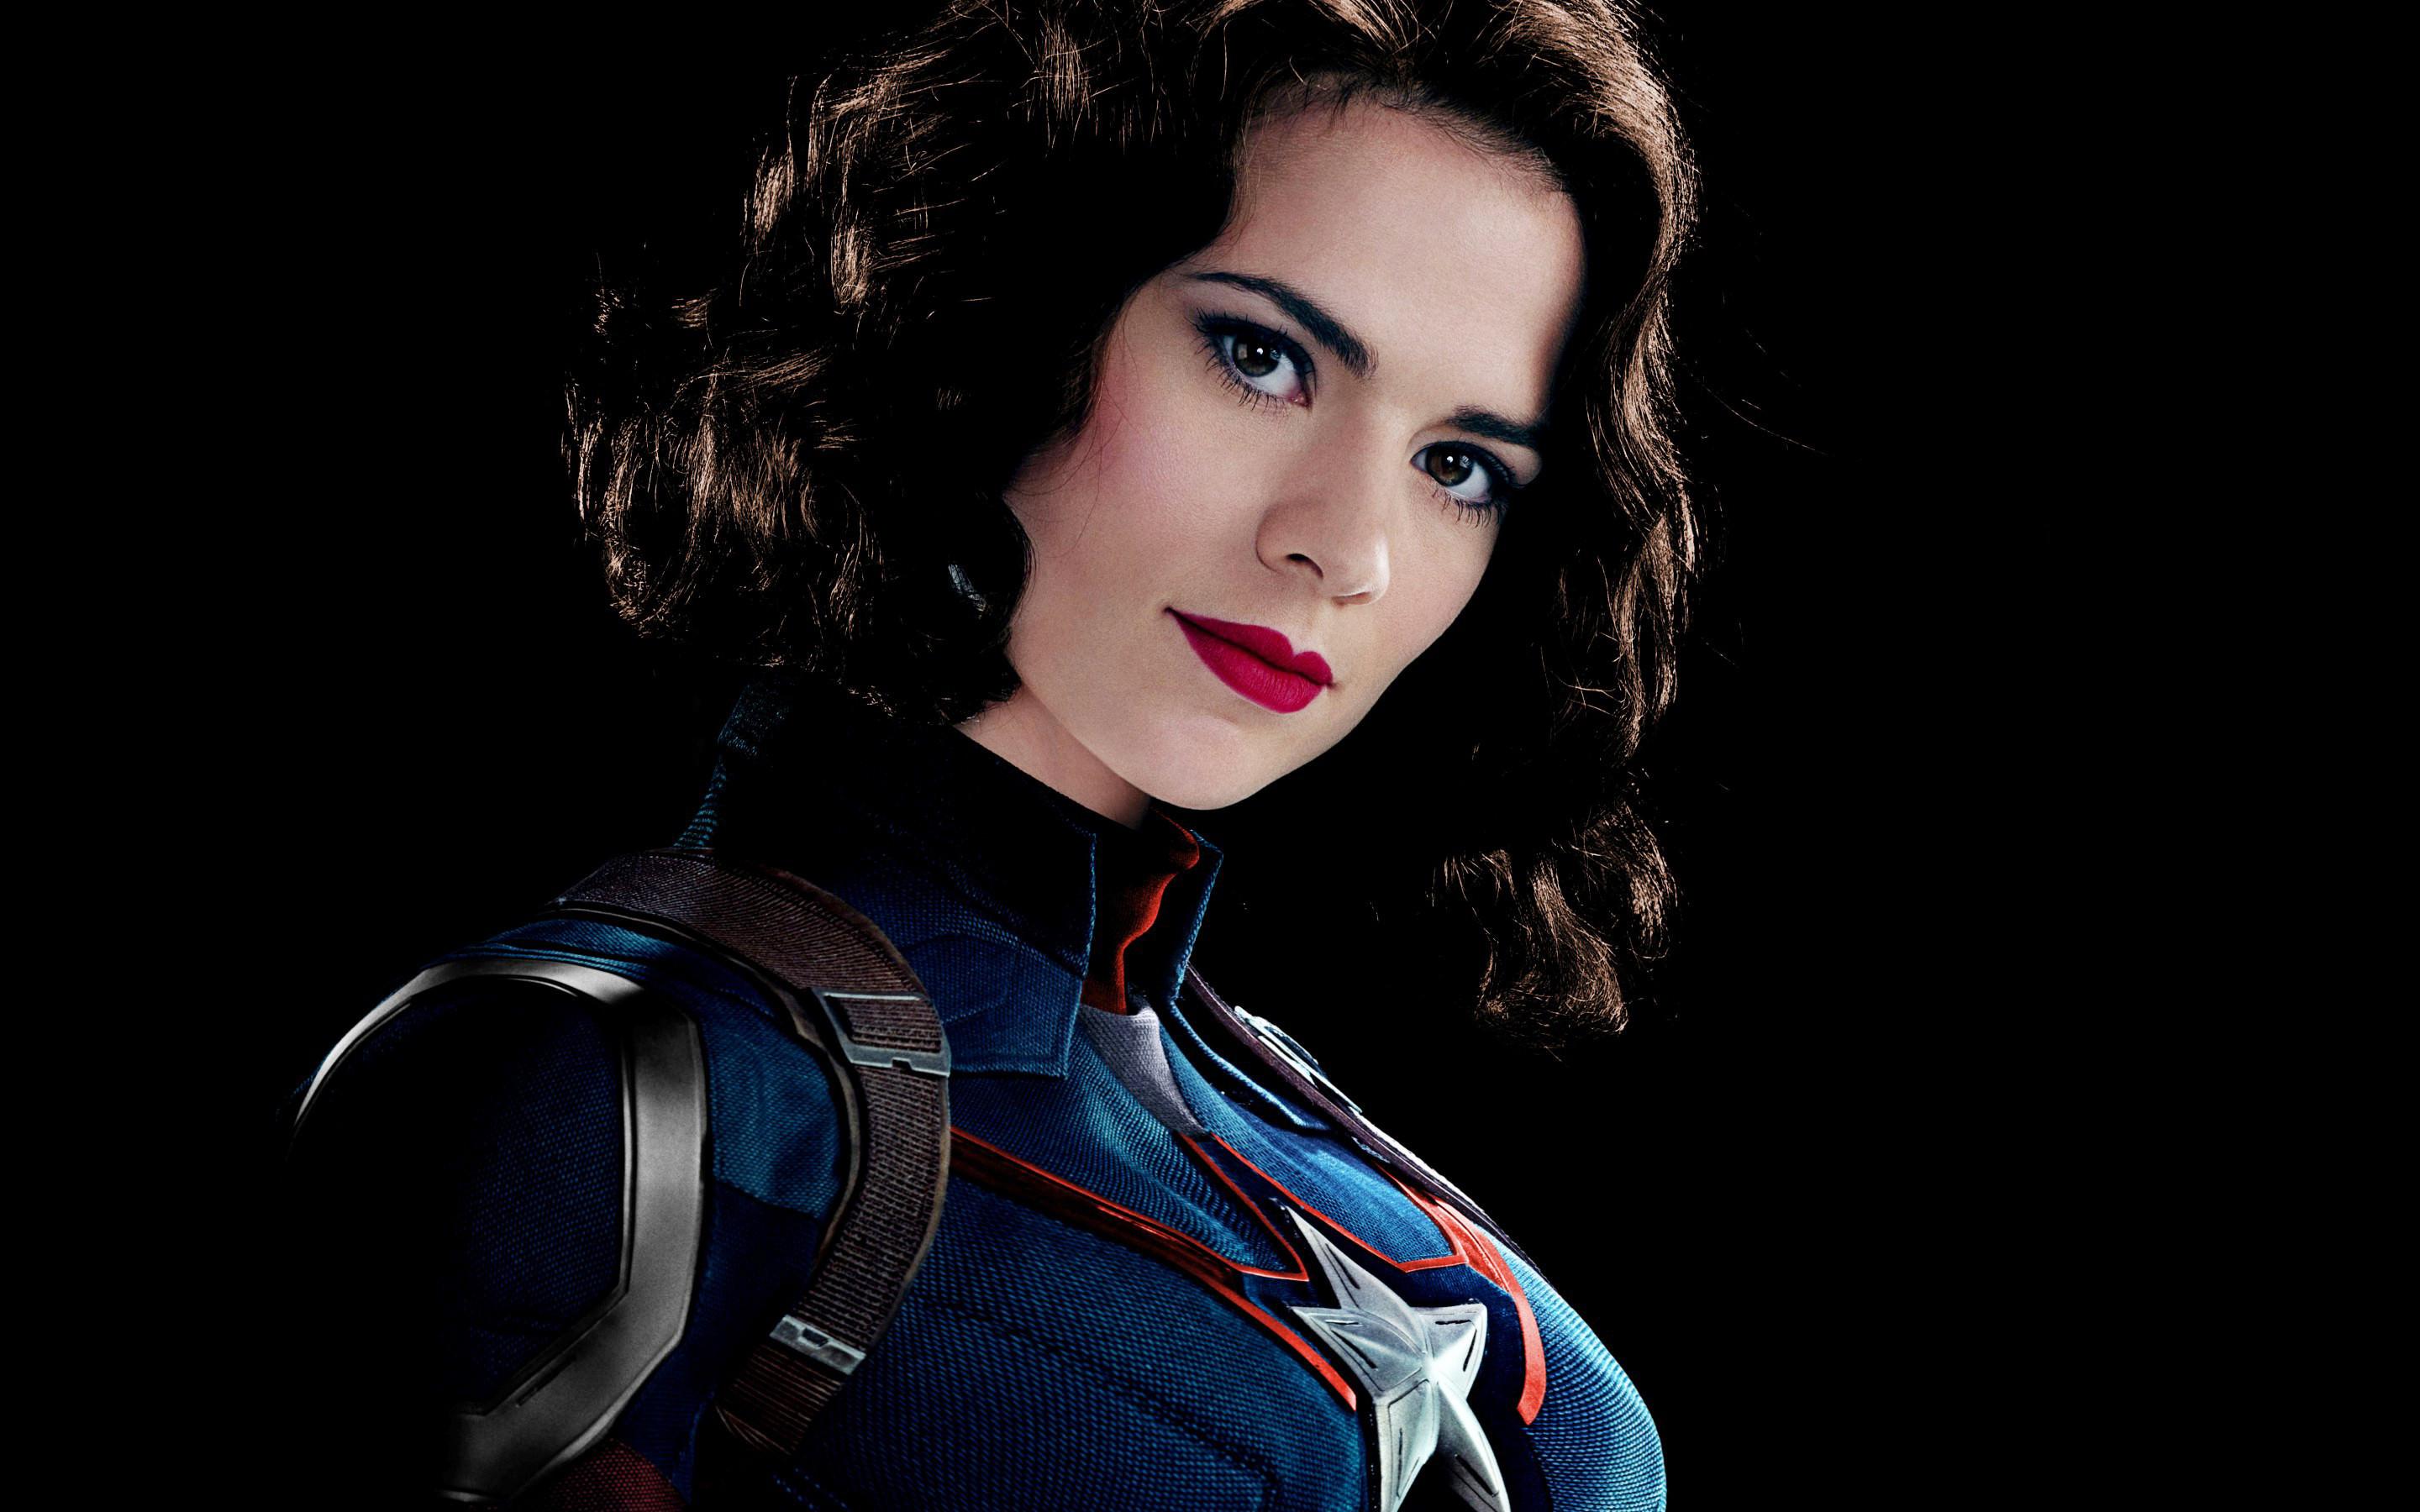 Peggy Carter Wallpapers